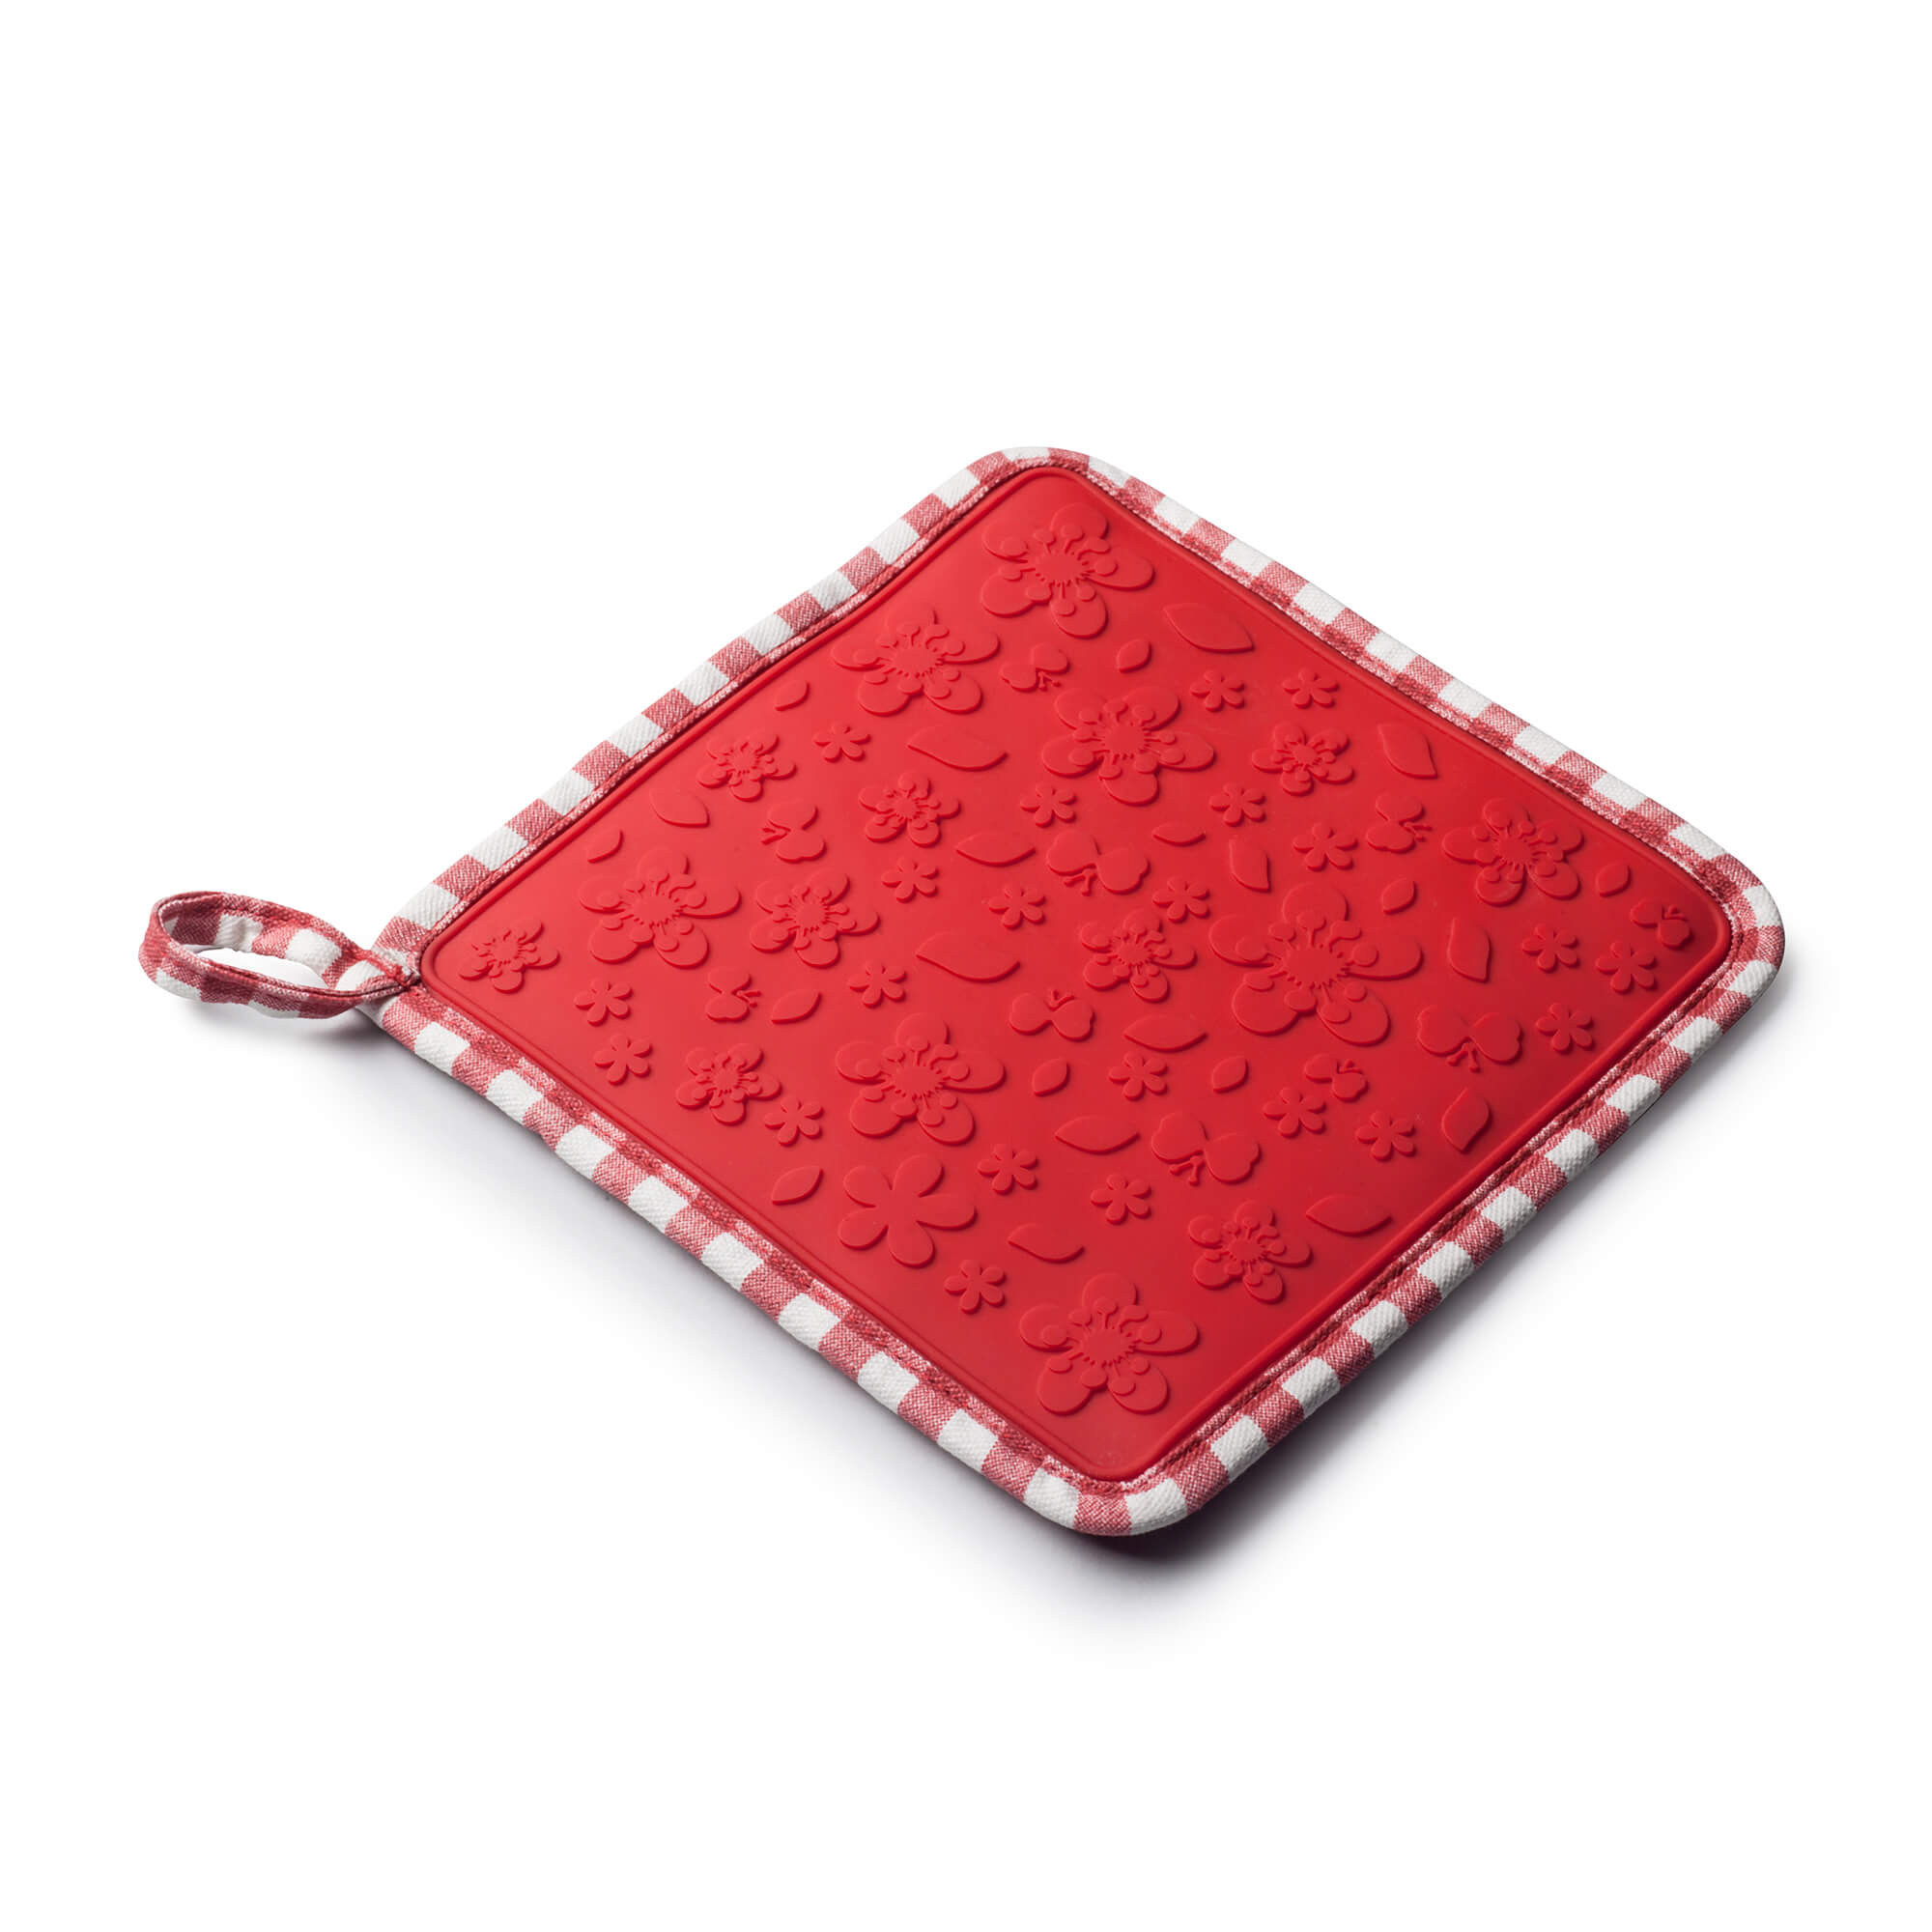 Red Square Shaped Hot Mat and Grab silicone side